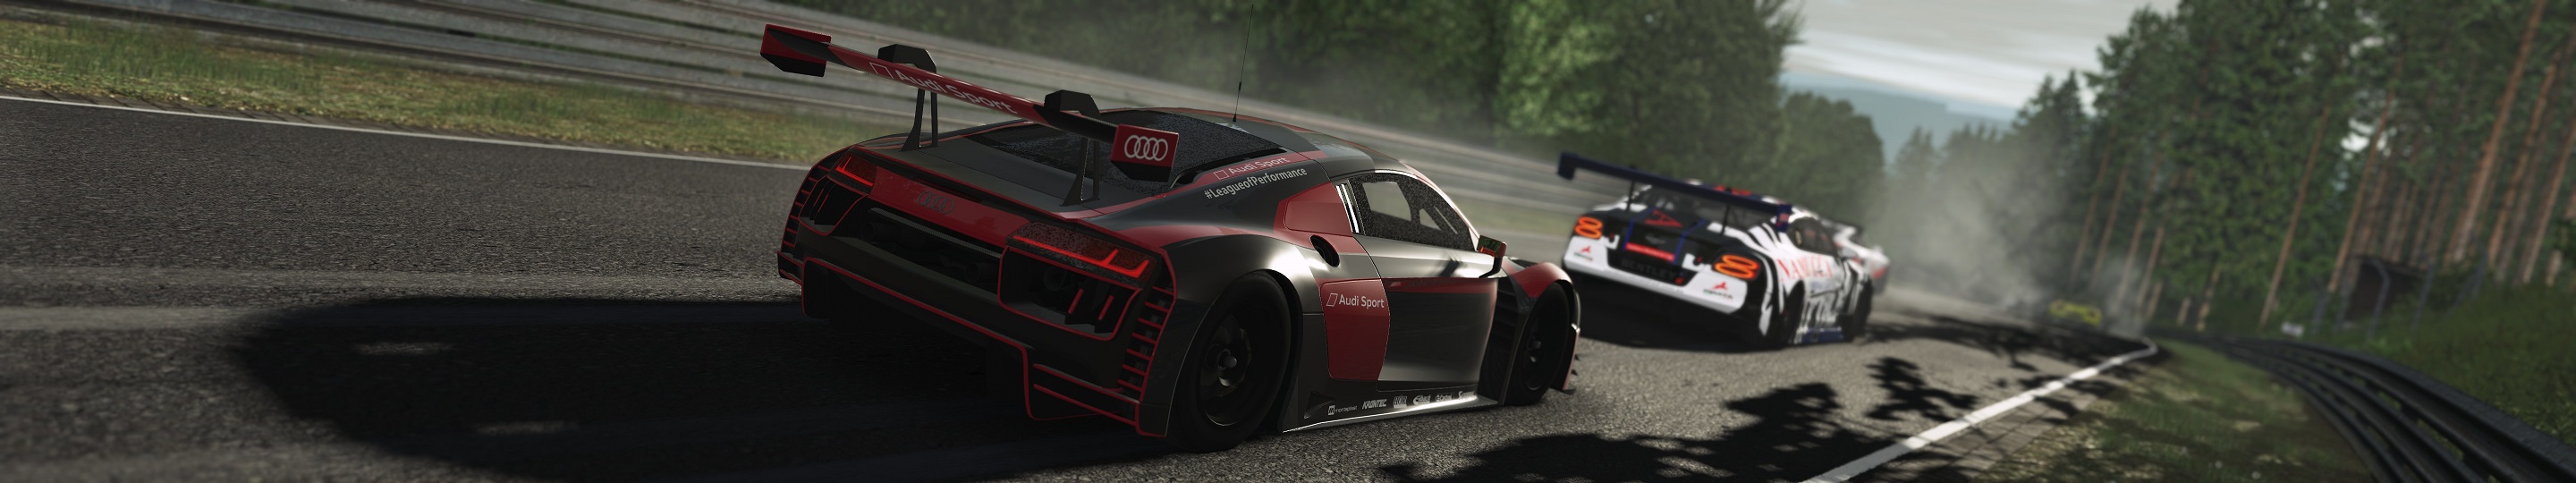 1 rF2 CHALLENGERS & GT3 at NORDS audi copy.jpg